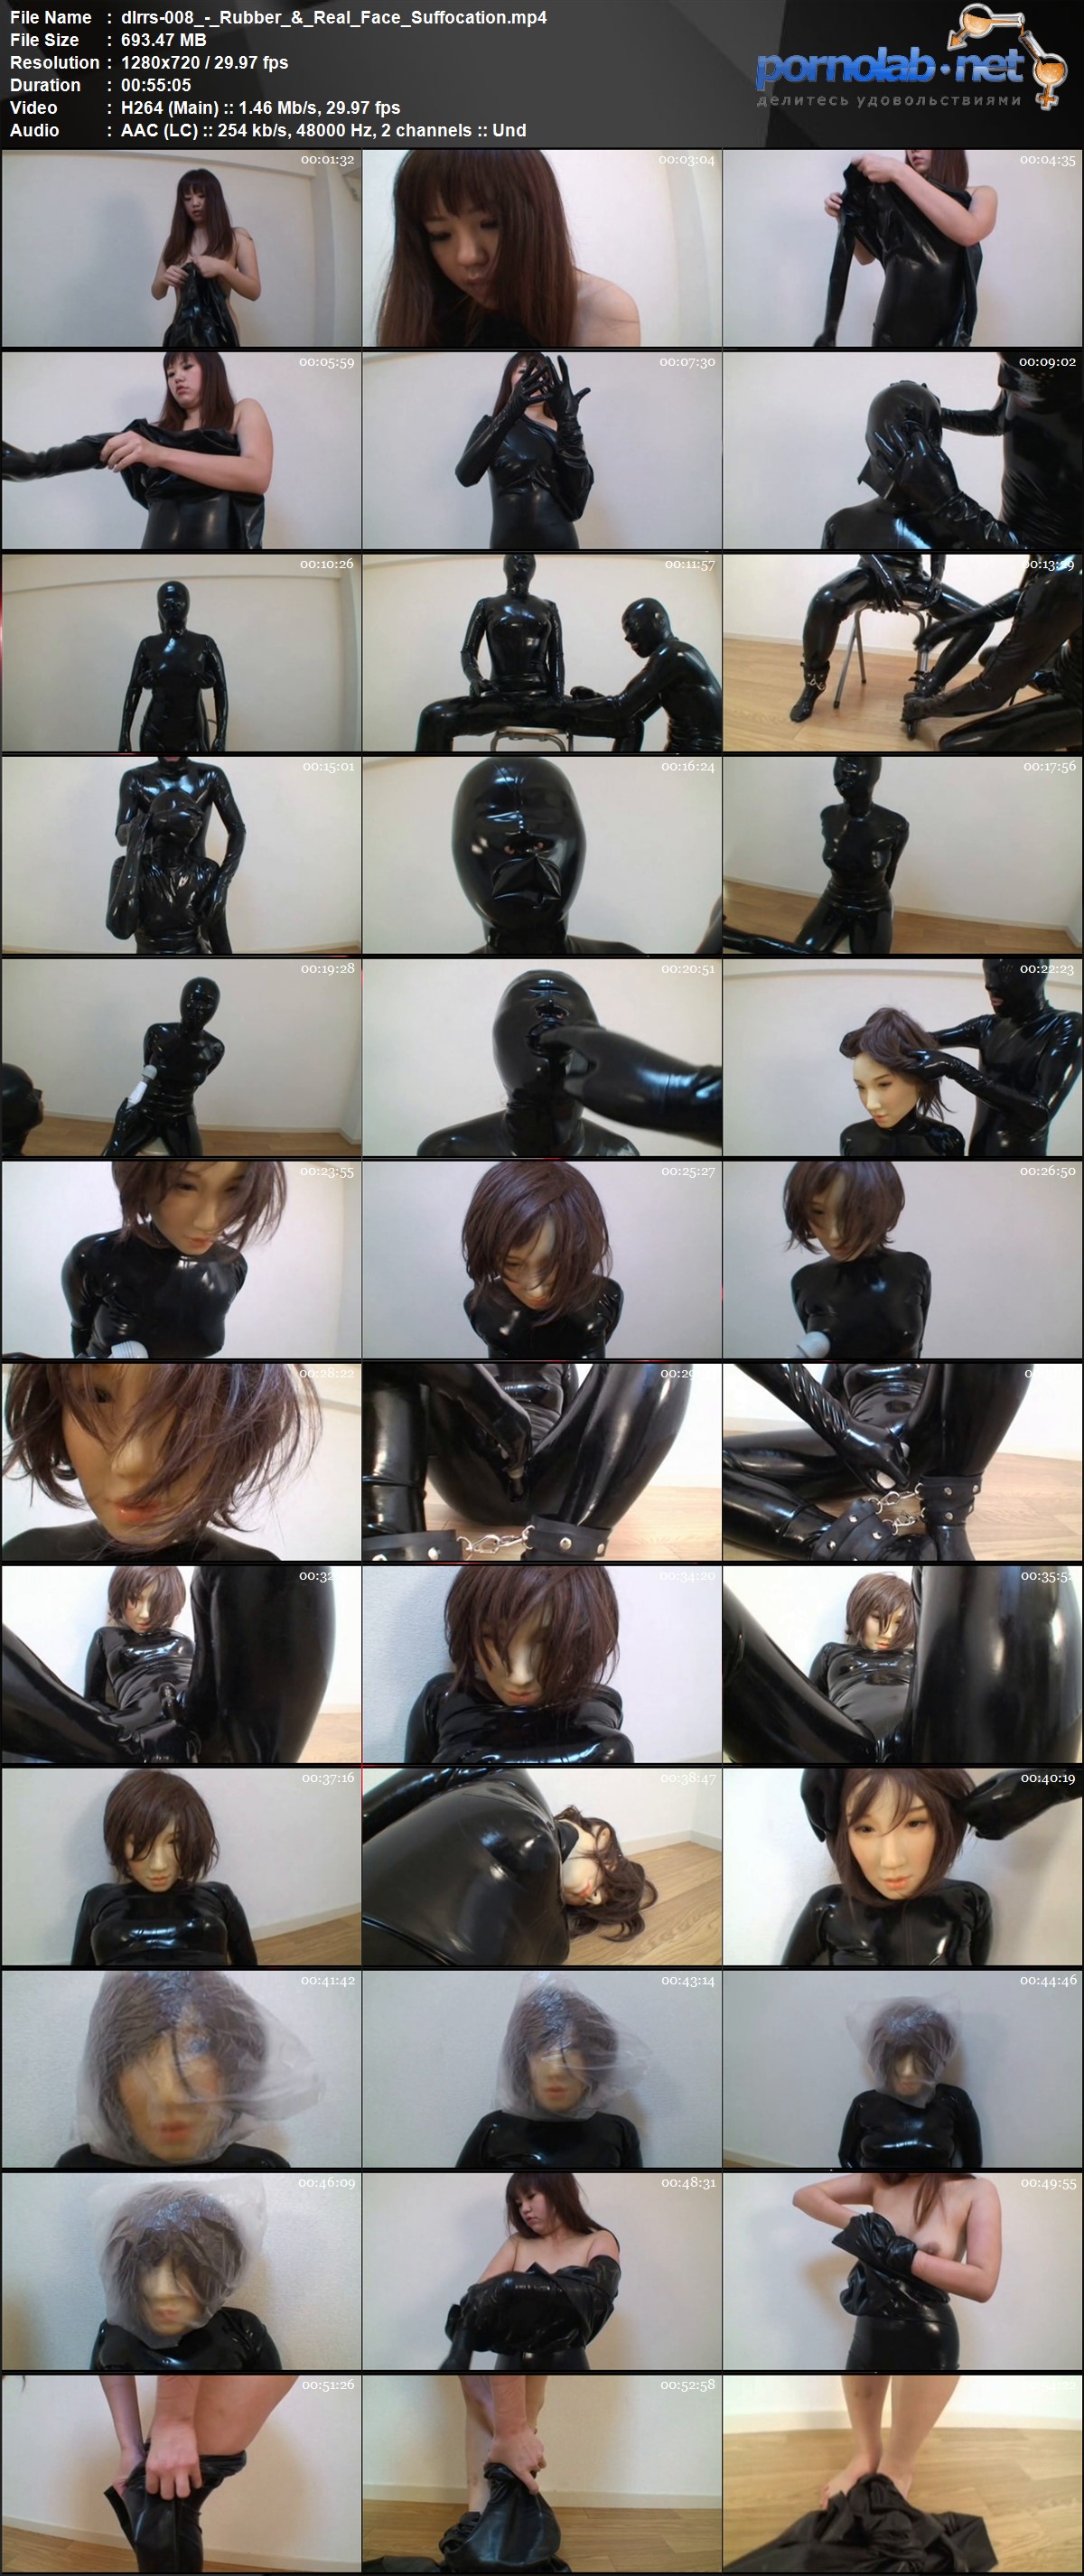 dlrrs 008 Rubber Real Face Suffocation mp 4